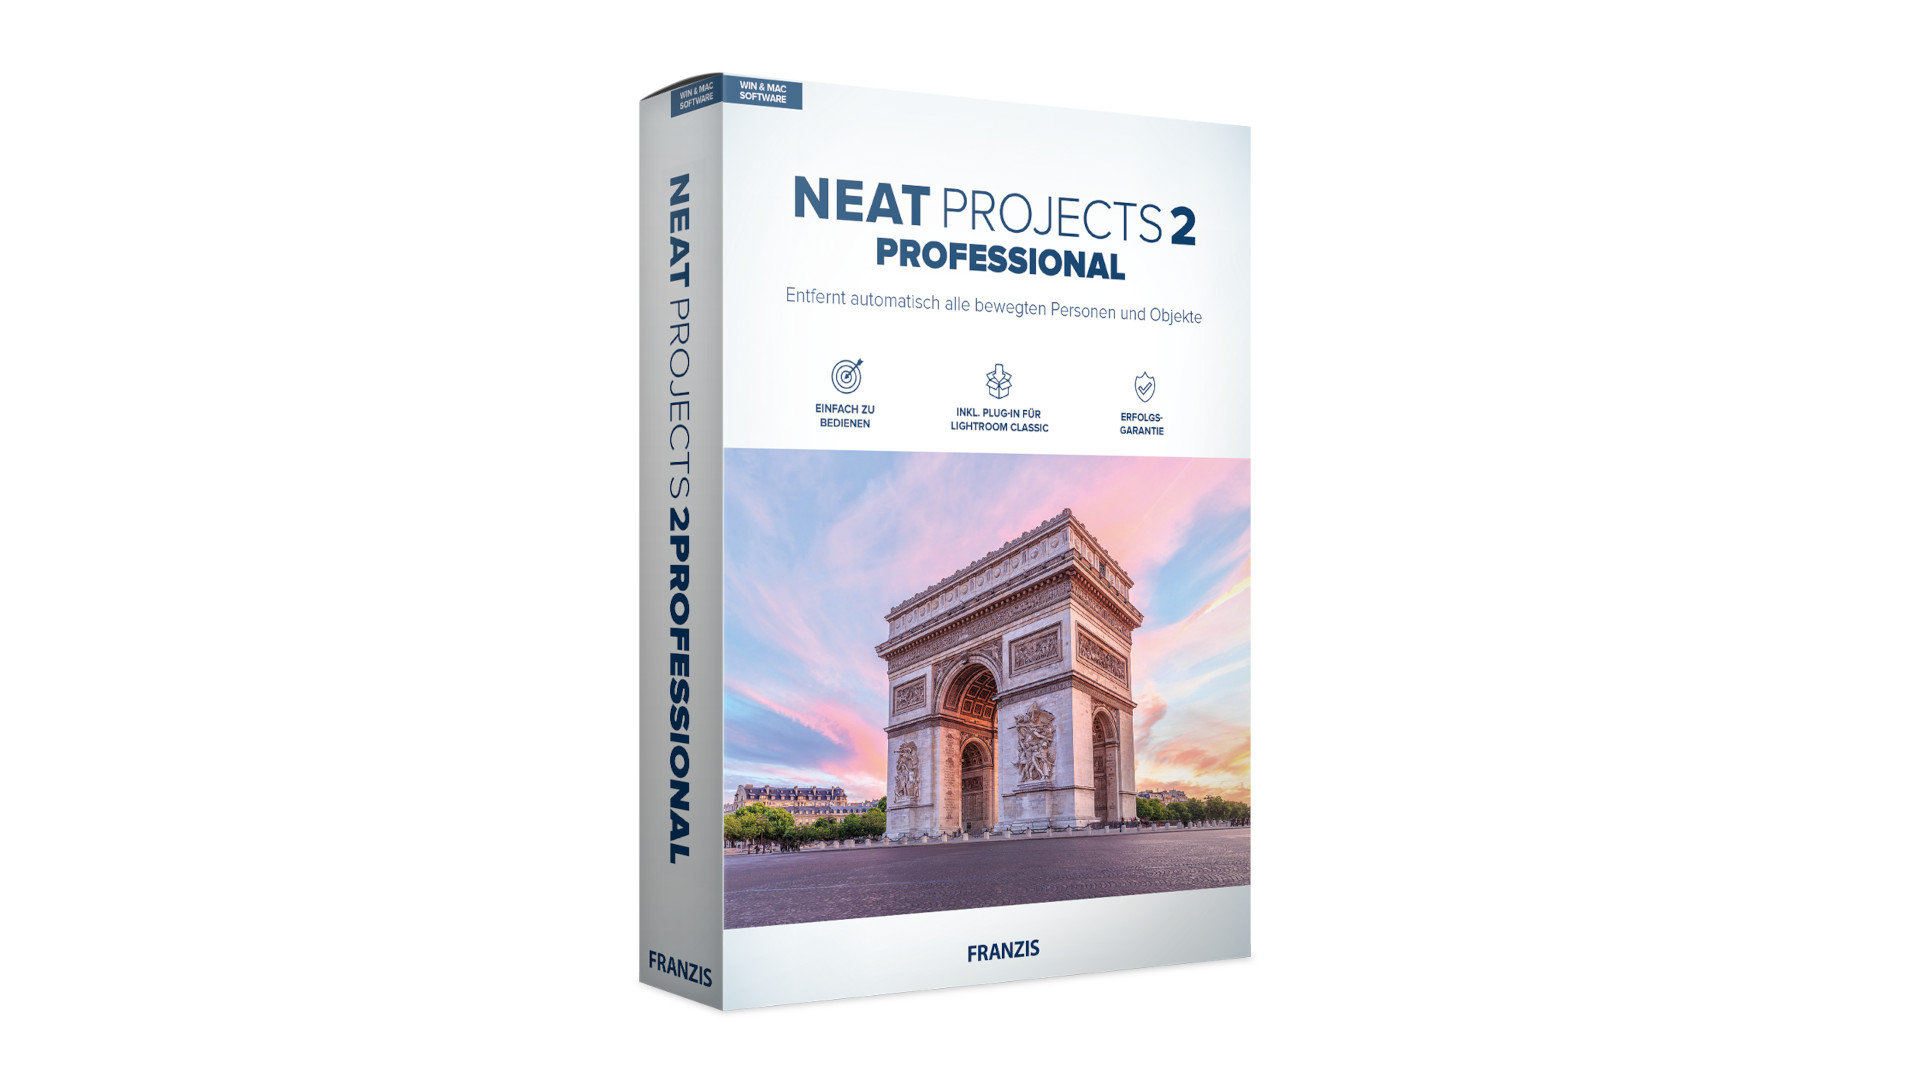 [$ 33.89] NEAT projects 2 Pro - Project Software Key (Lifetime / 1 PC)